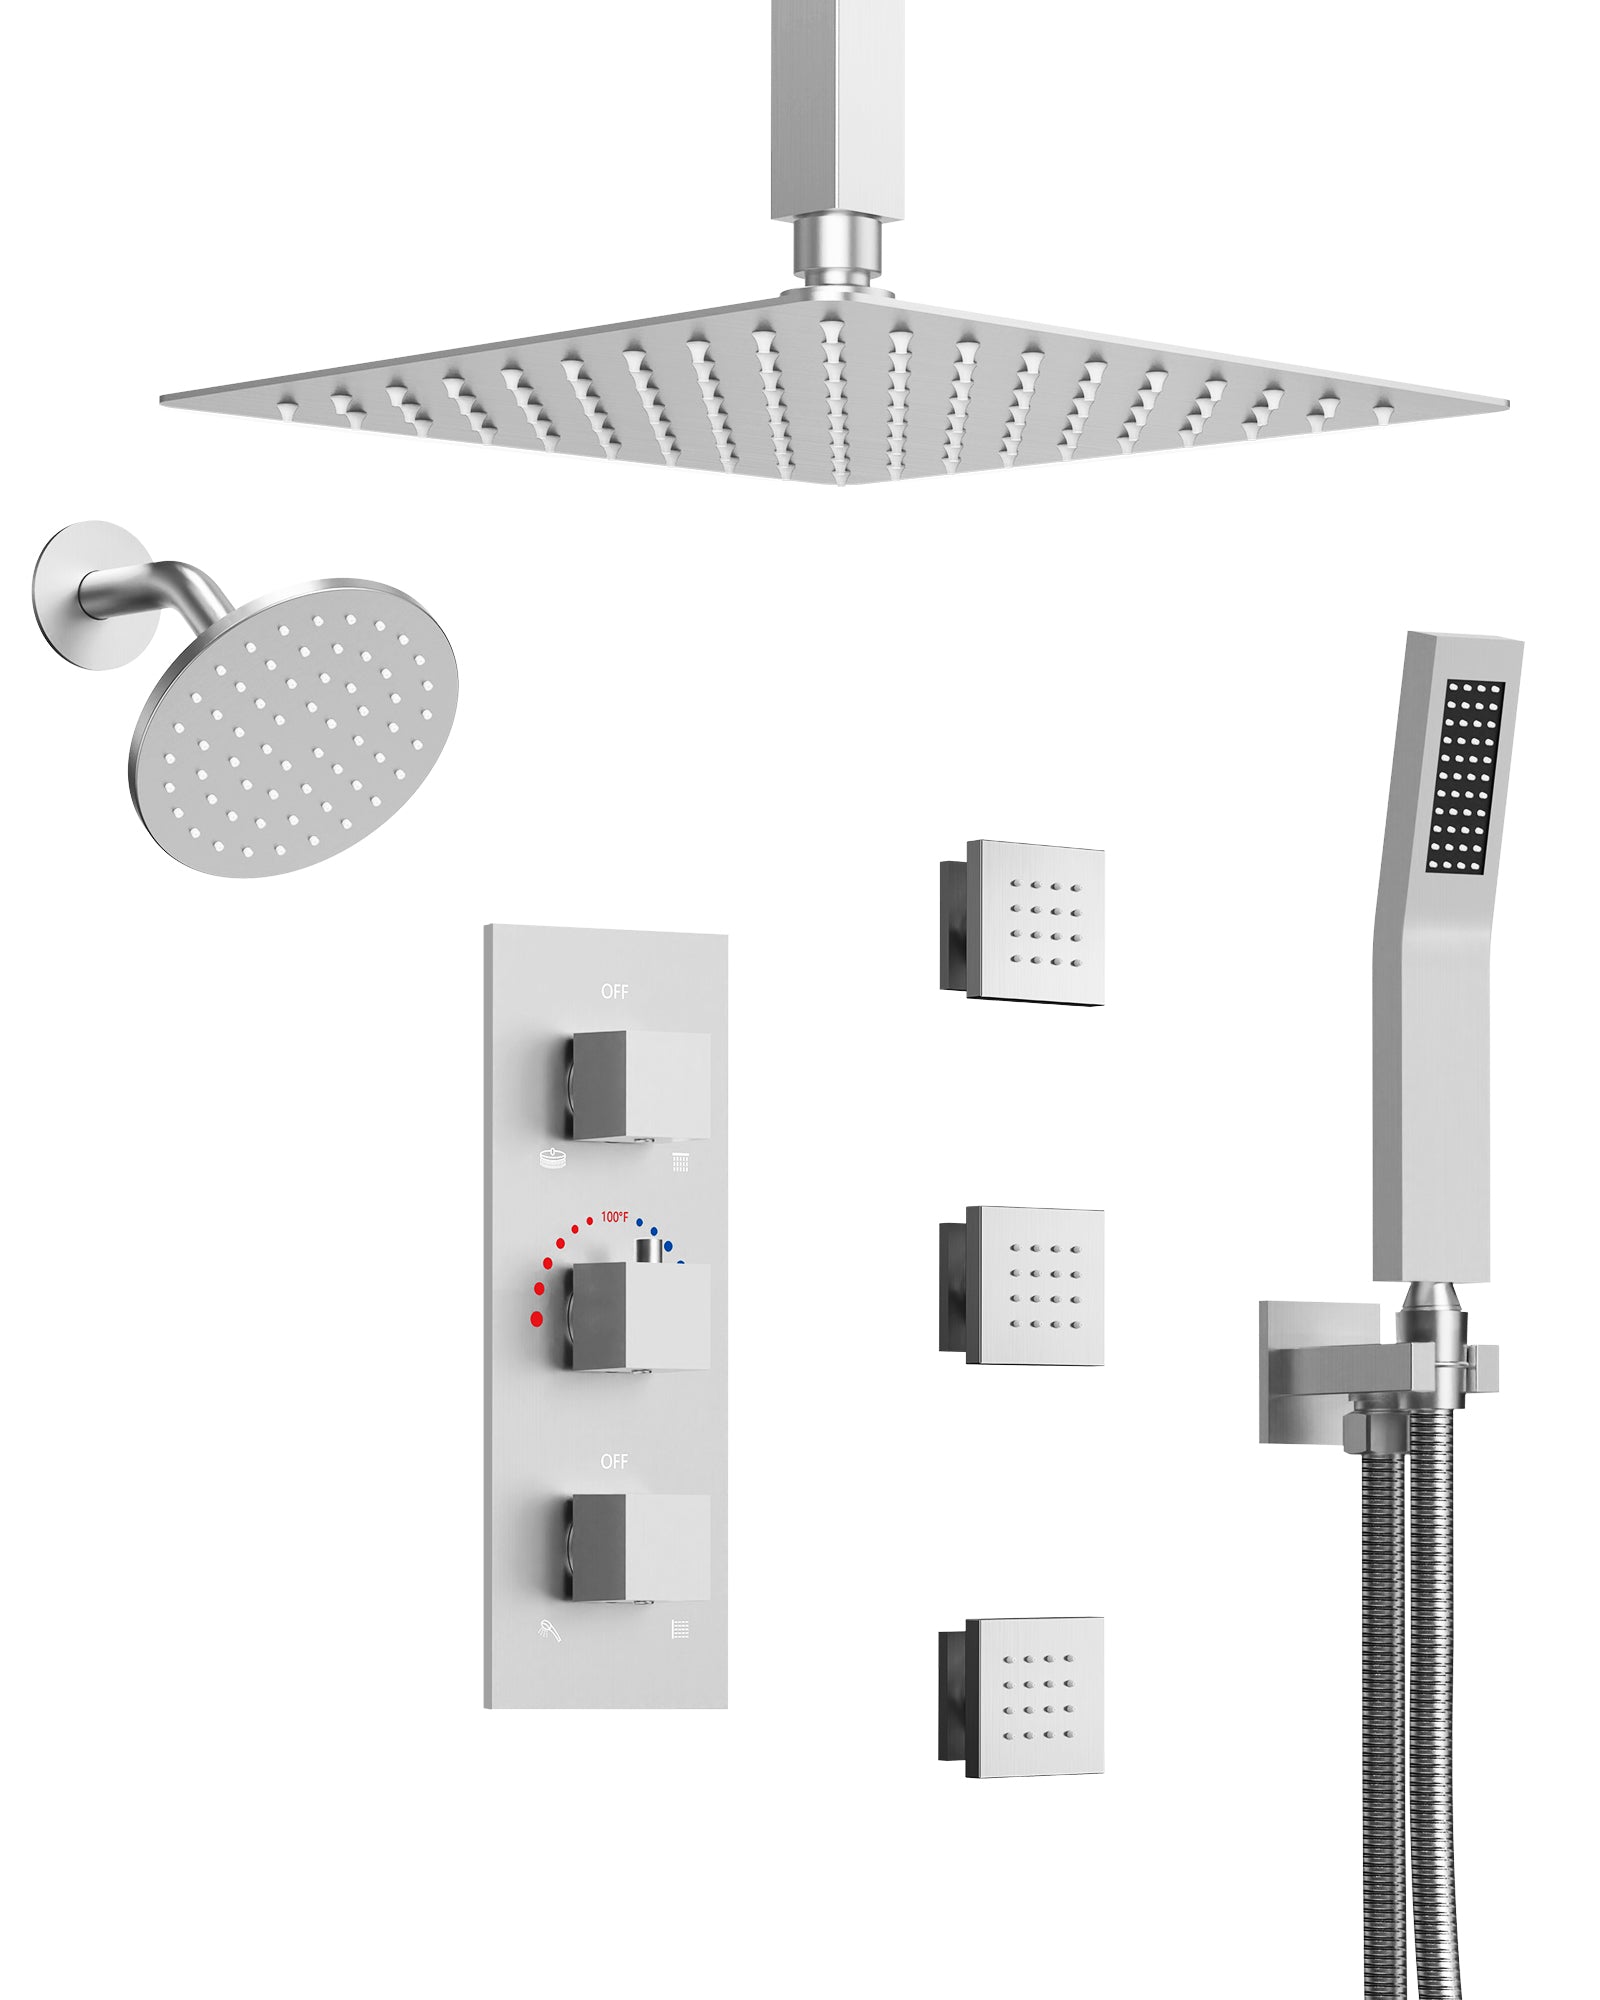 EVERSTEIN SFS-1067-NK12 12" High-Pressure Rainfall Complete Shower System with Rough-in Valve